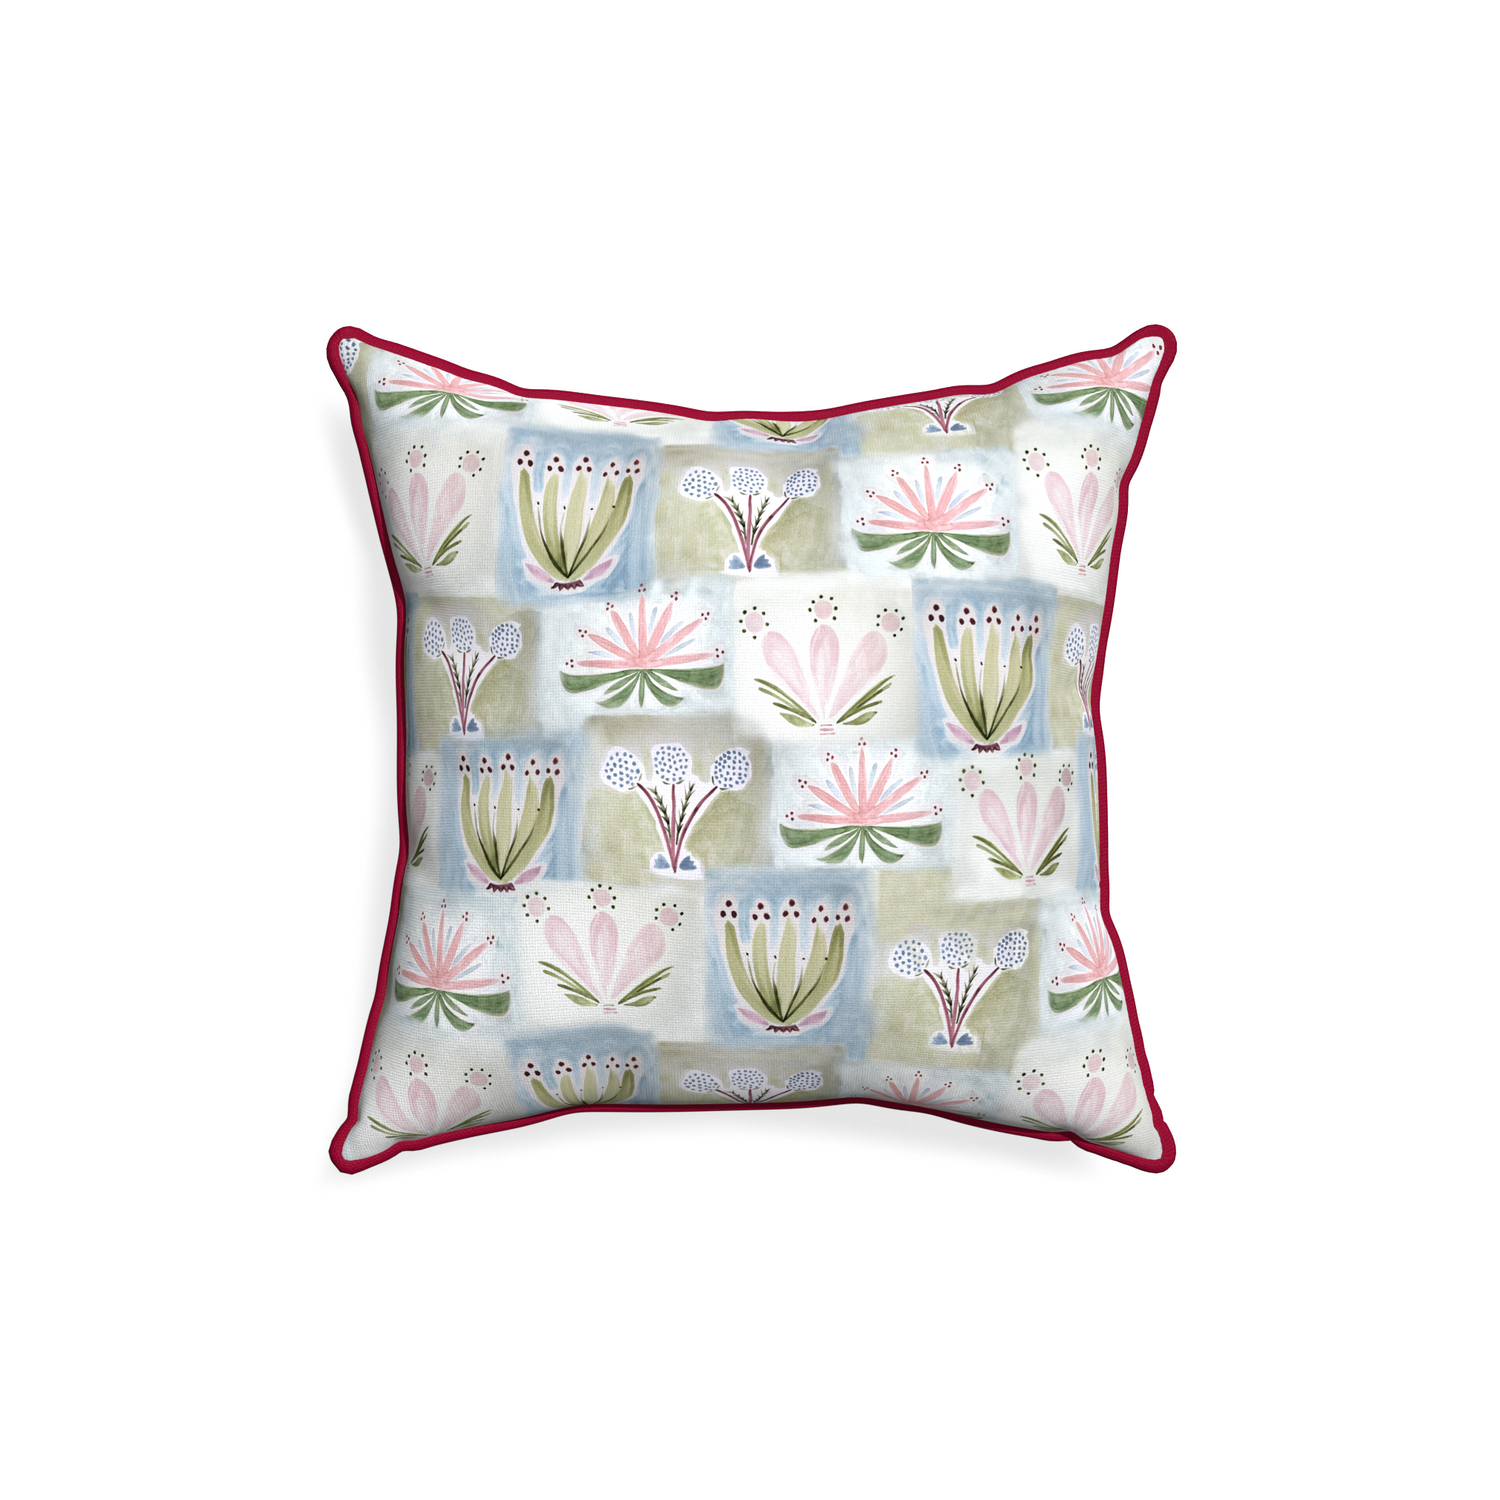 18-square harper custom pillow with raspberry piping on white background